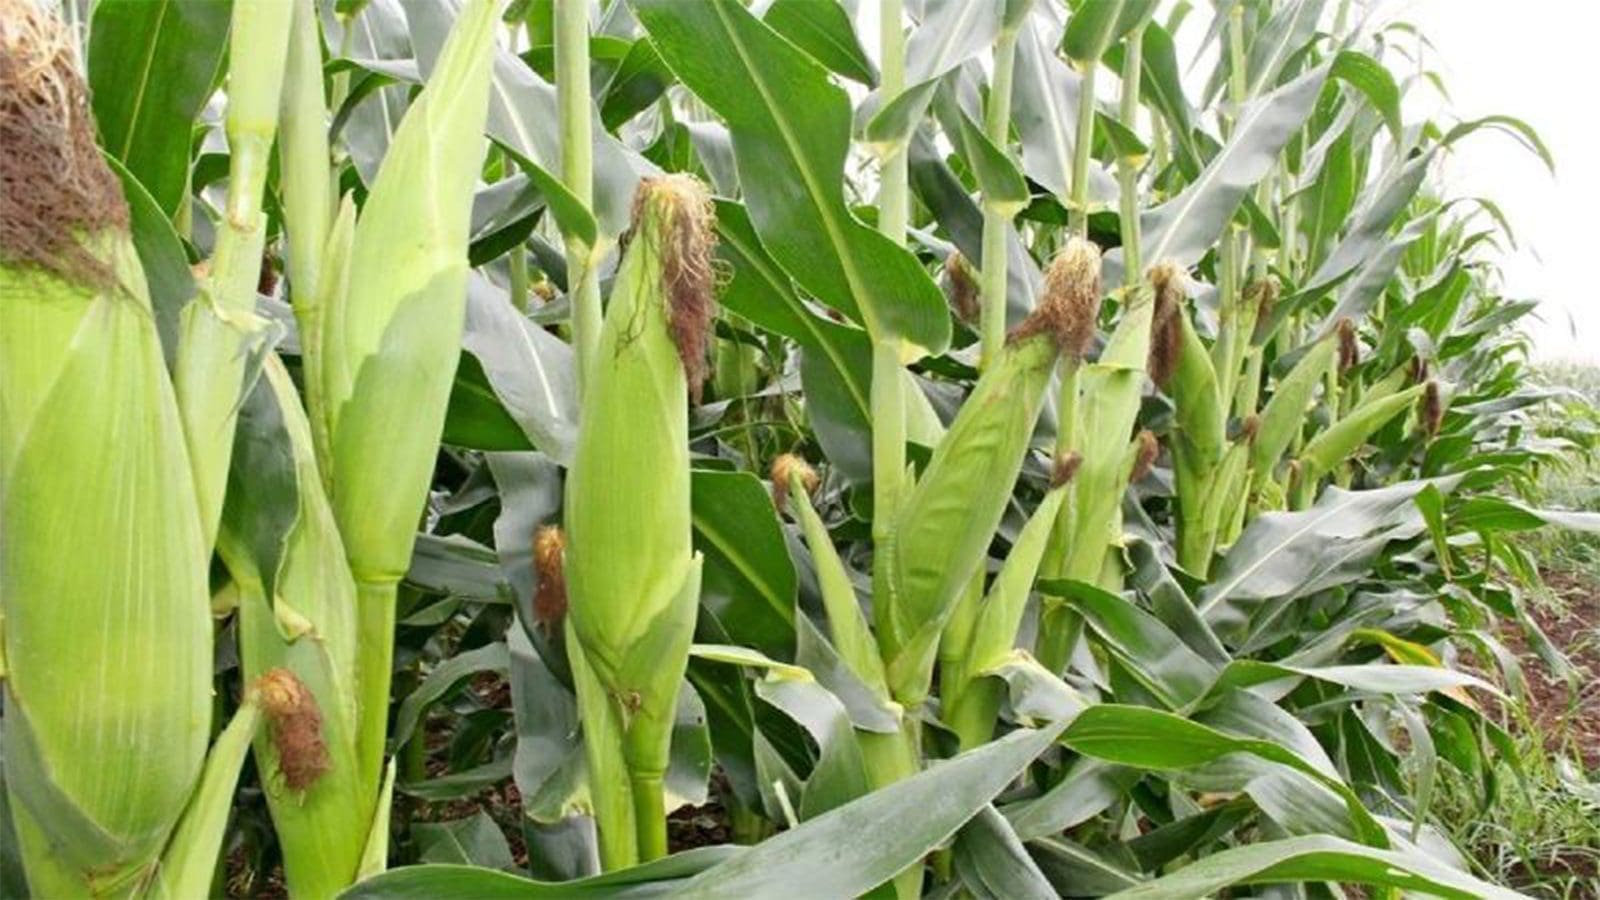 Early maturing maize cultivars to aid Africa in achieving food security